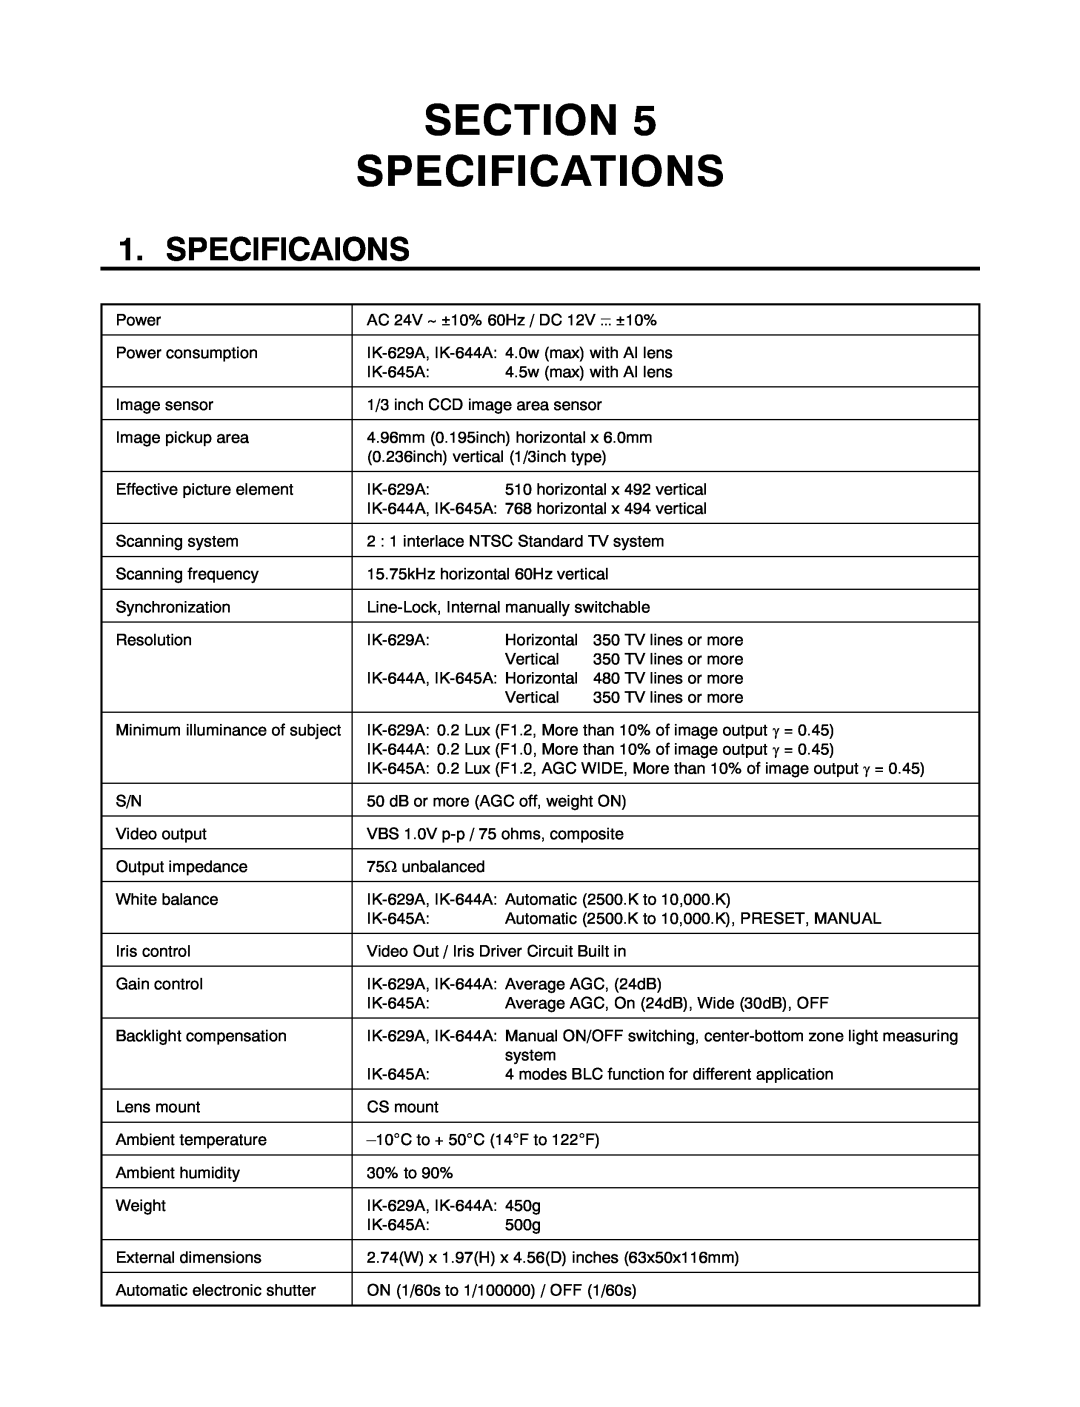 Toshiba IK-644A manual Section Specifications, Specificaions 